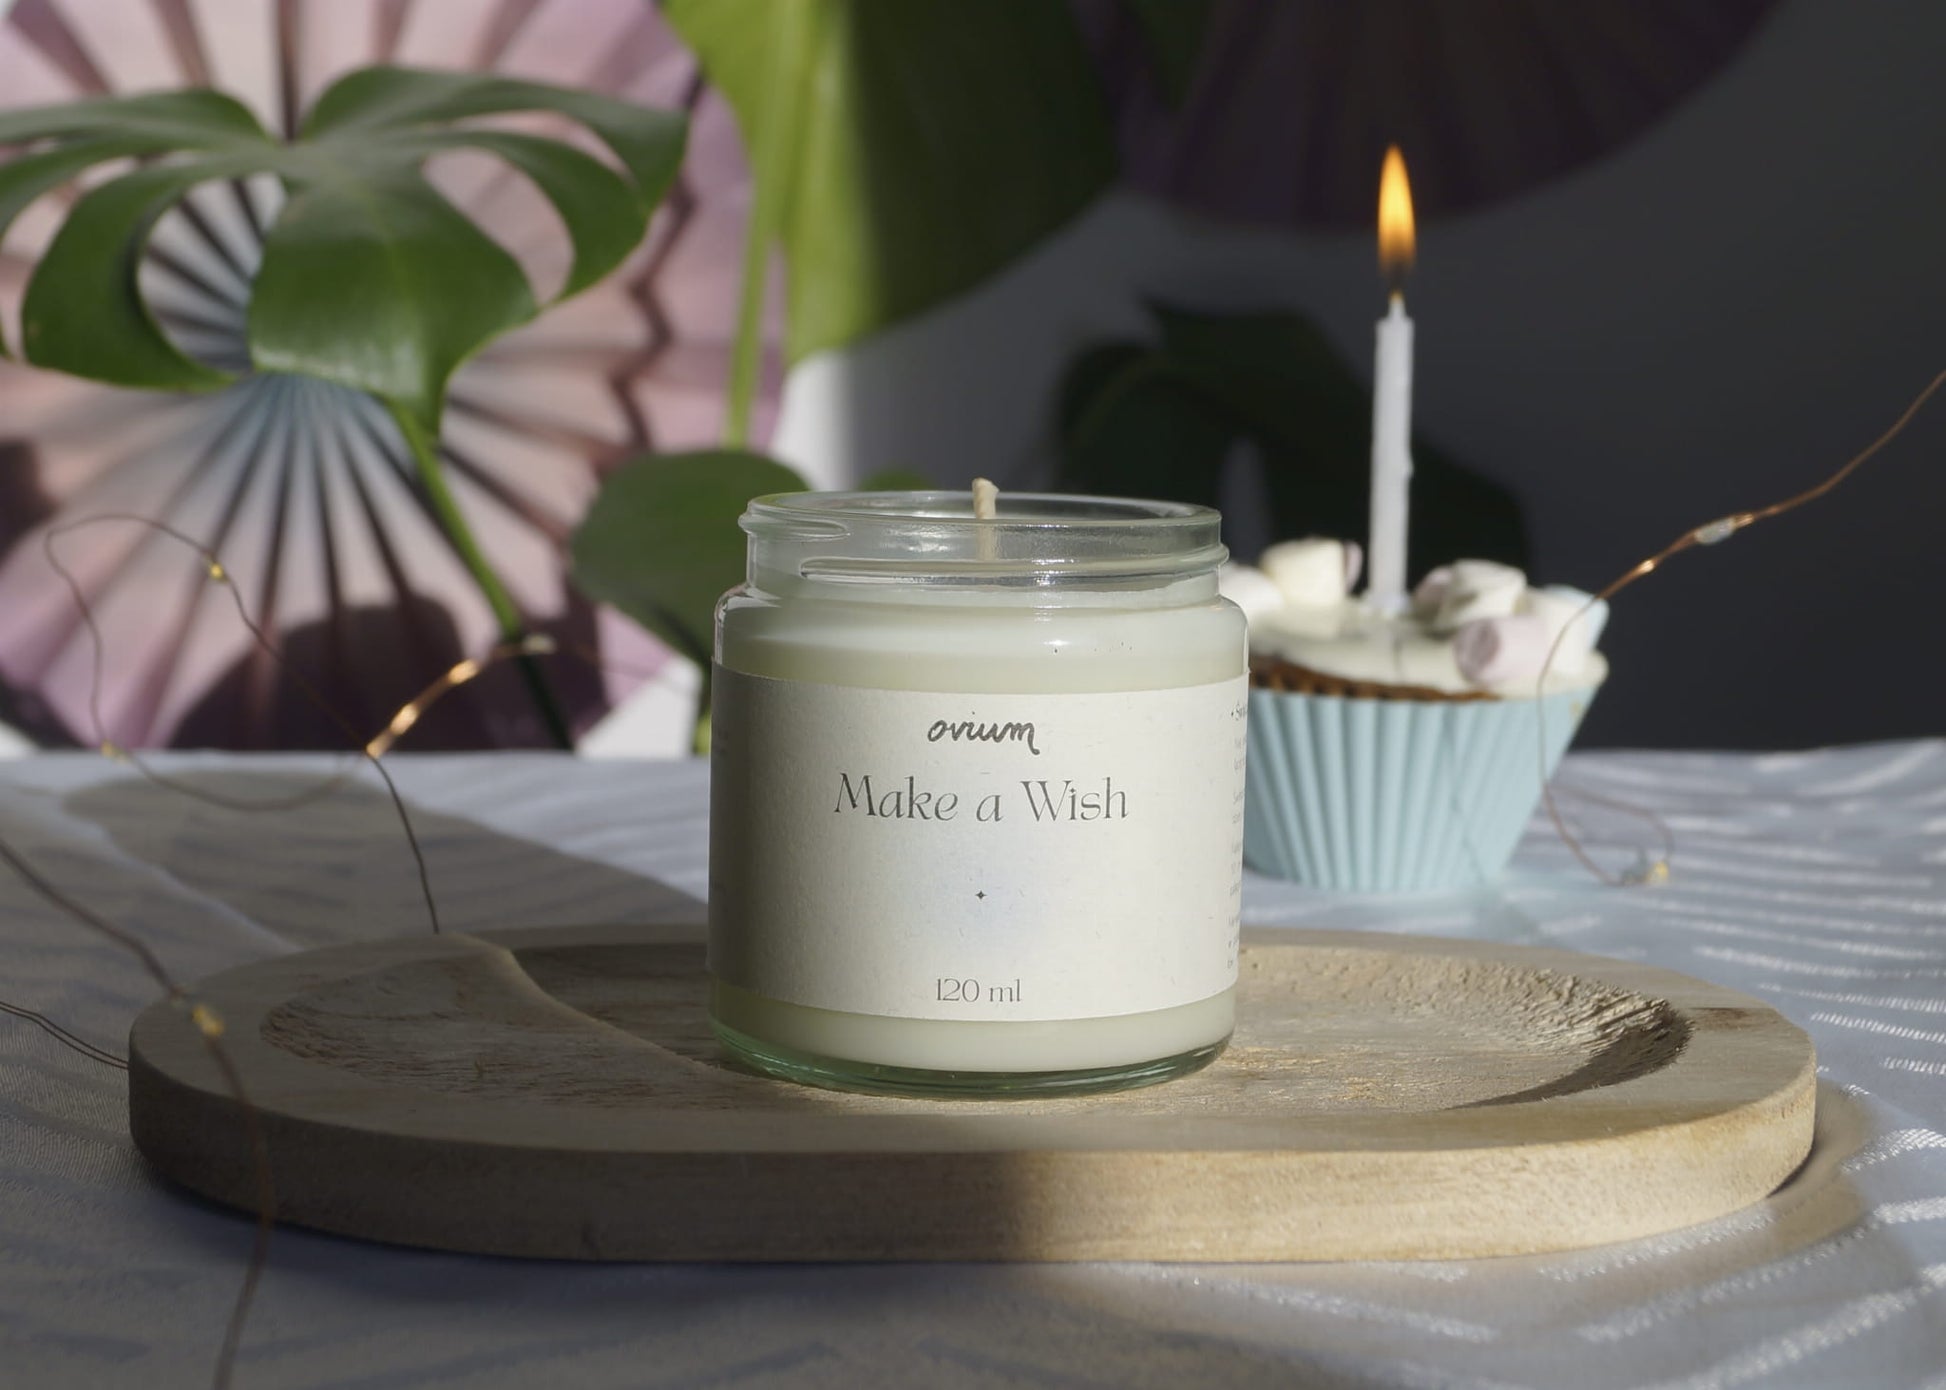 what is ovium meaning, ovium fragrance,  make a wish and attract wealth soy candle